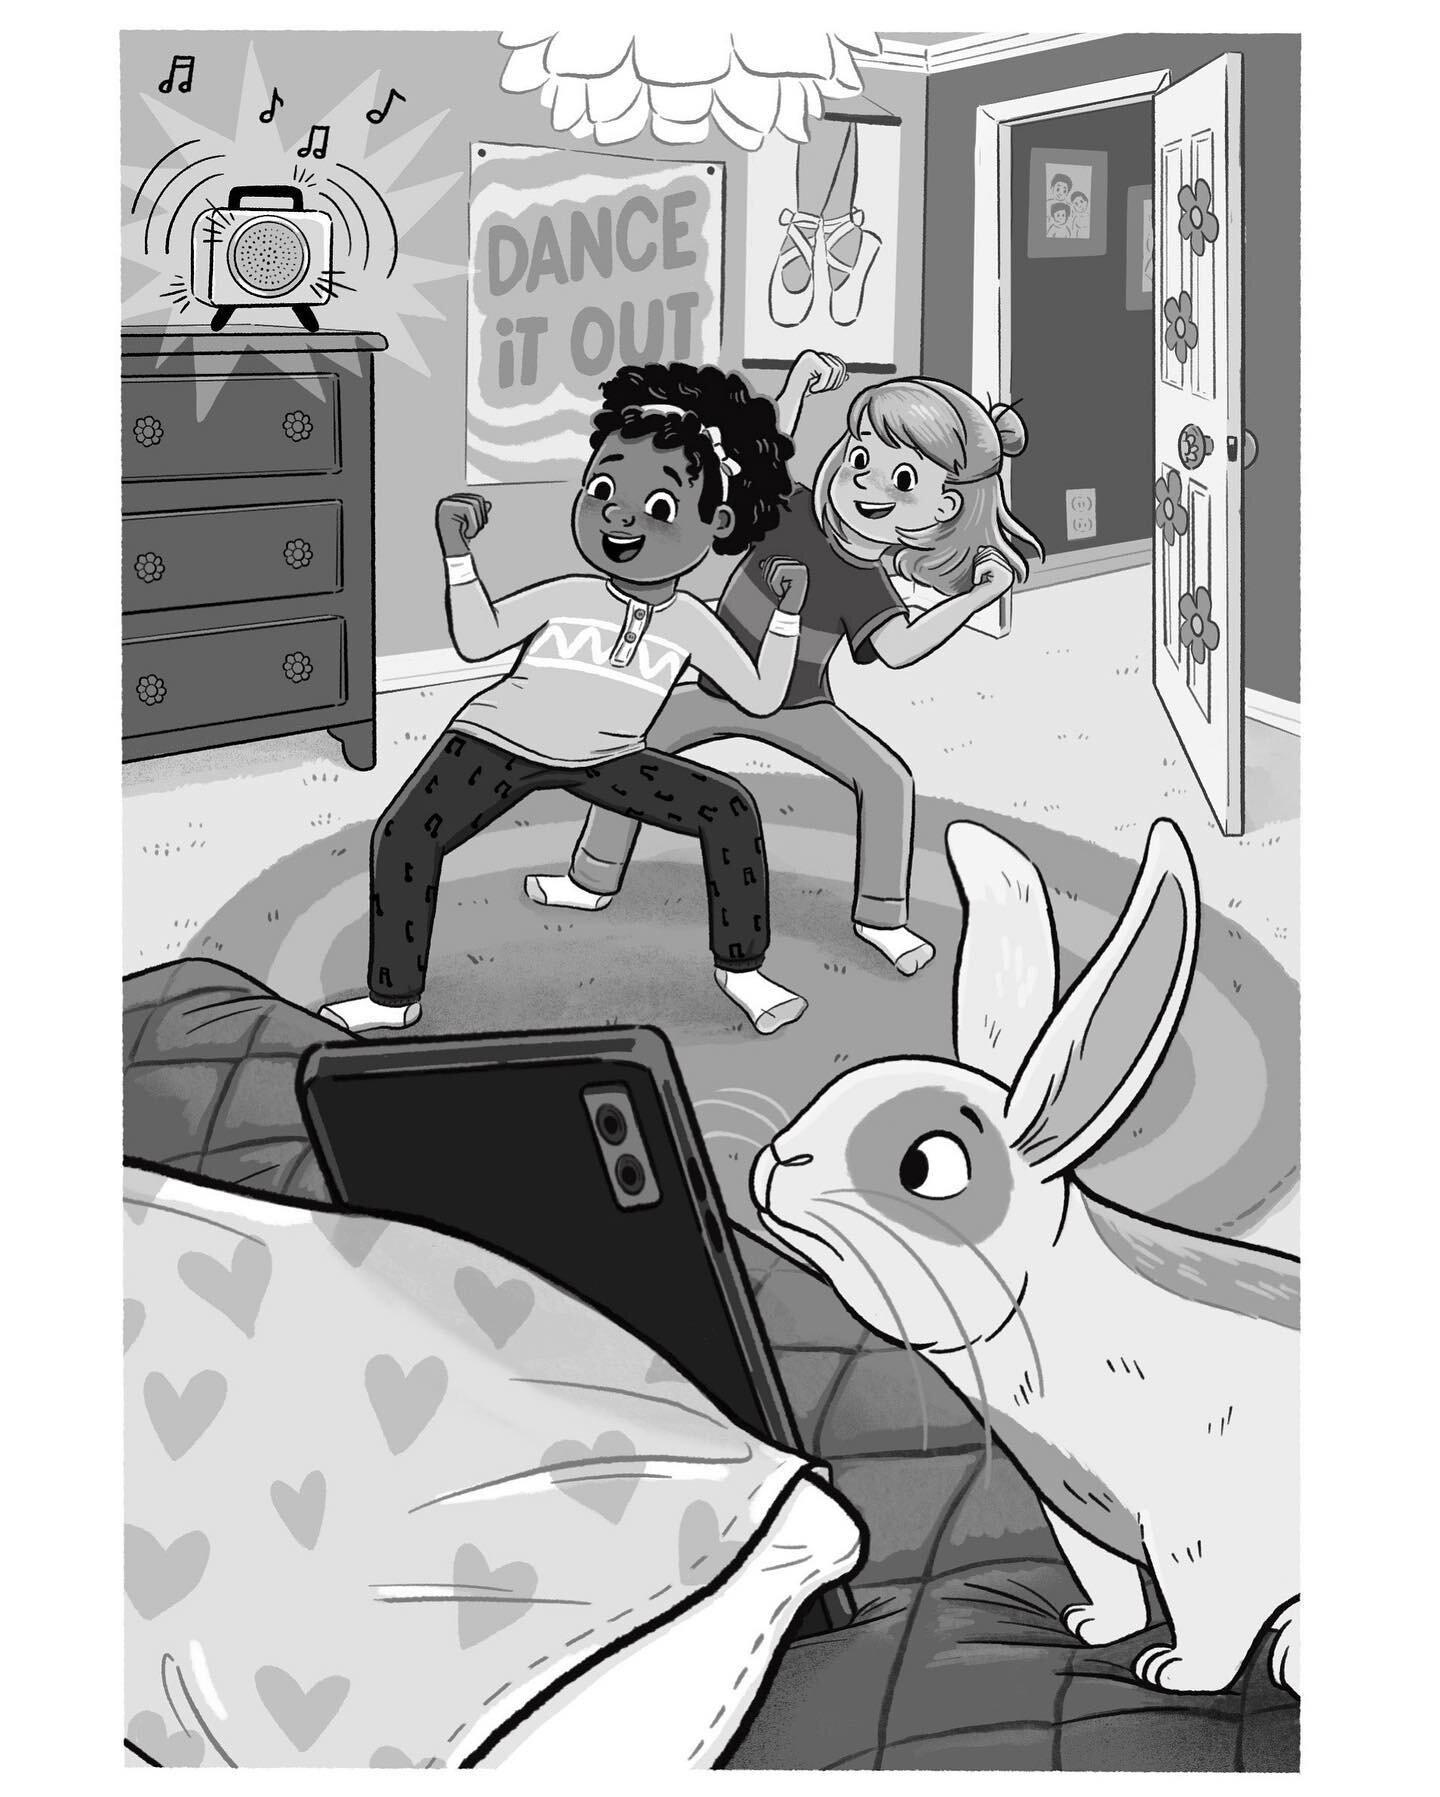 Working on my chapter book illustration portfolio and remembering perfecting many Backstreet Boys dances at my best friend&rsquo;s house 👯&zwj;♀️

New Chapter Book section on my website, link in bio 🐰 

#tiktokdance #bunnyrabbit #petrabbit #petbunn